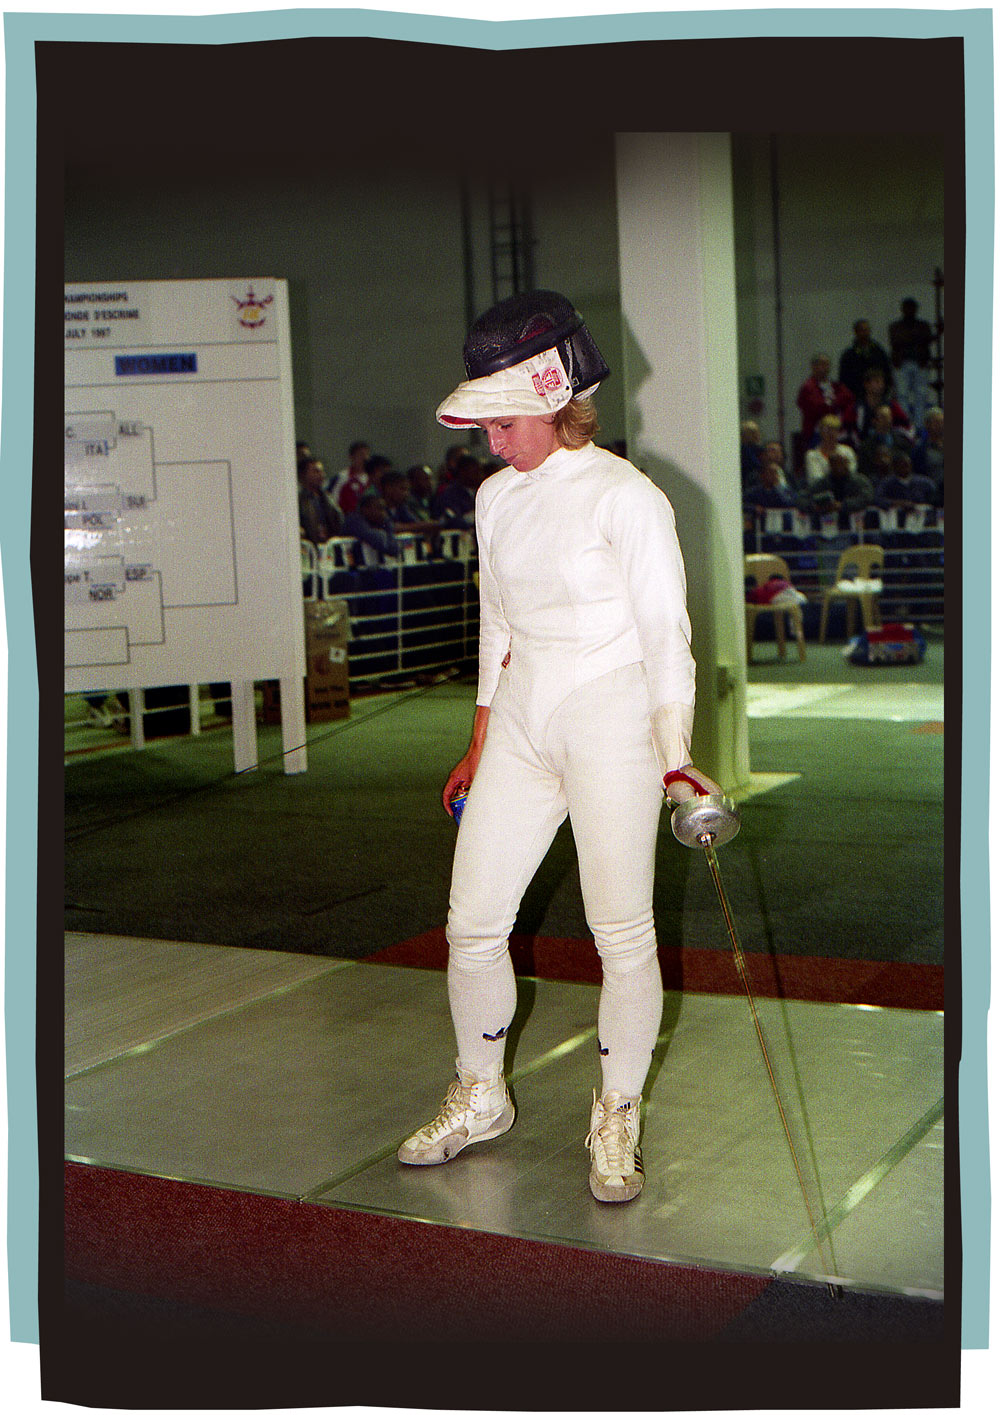 33 fencing championships